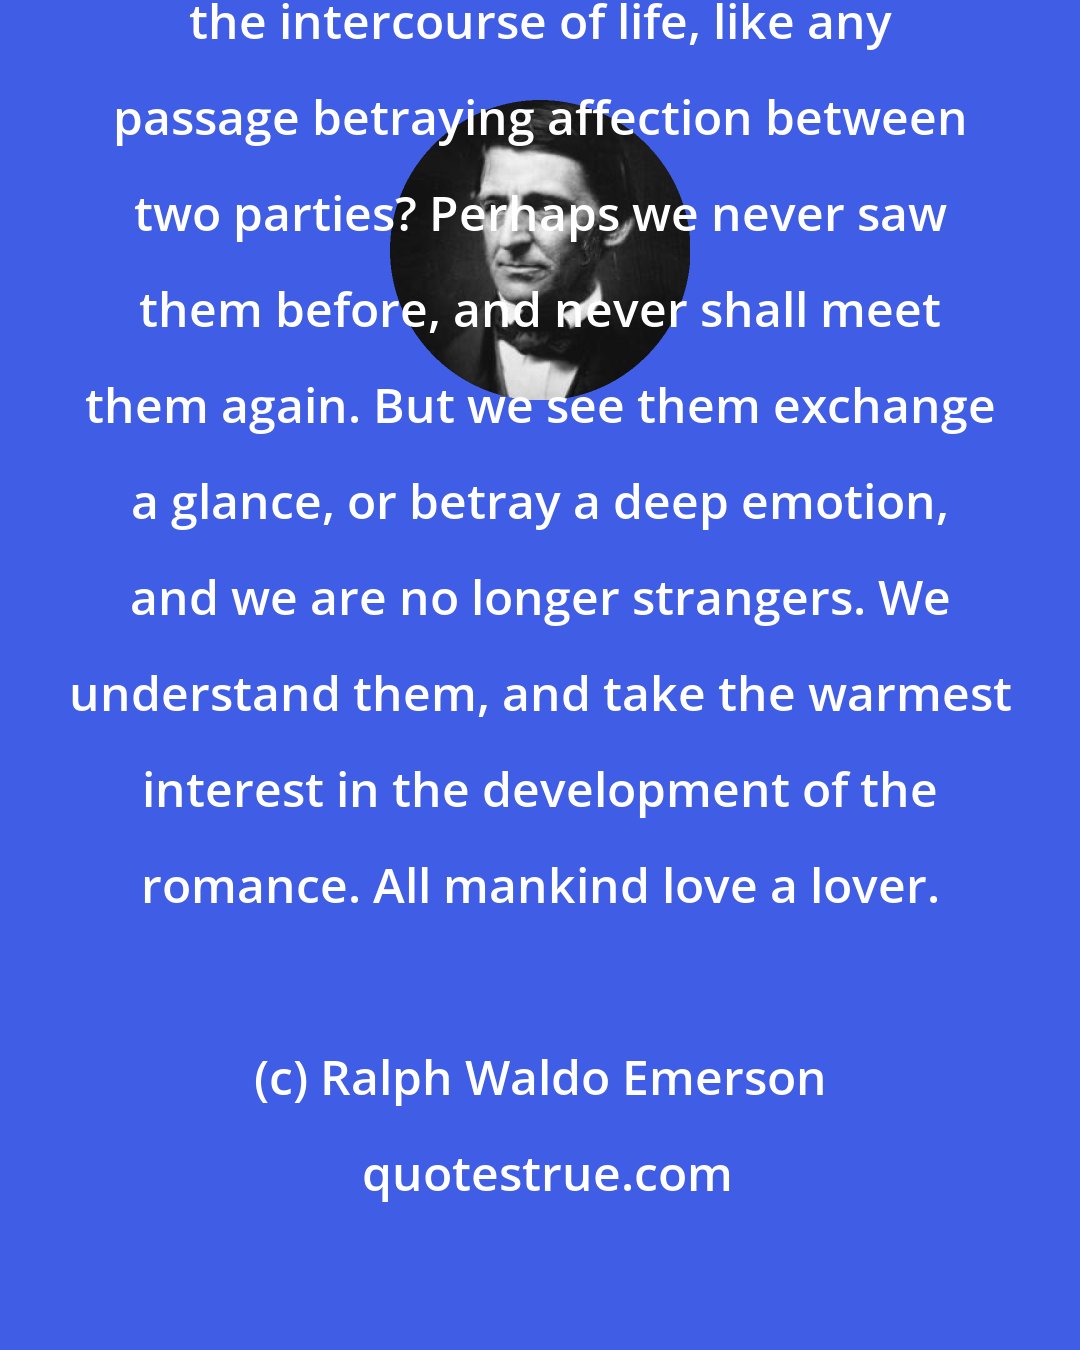 Ralph Waldo Emerson: And what fastens attention, in the intercourse of life, like any passage betraying affection between two parties? Perhaps we never saw them before, and never shall meet them again. But we see them exchange a glance, or betray a deep emotion, and we are no longer strangers. We understand them, and take the warmest interest in the development of the romance. All mankind love a lover.